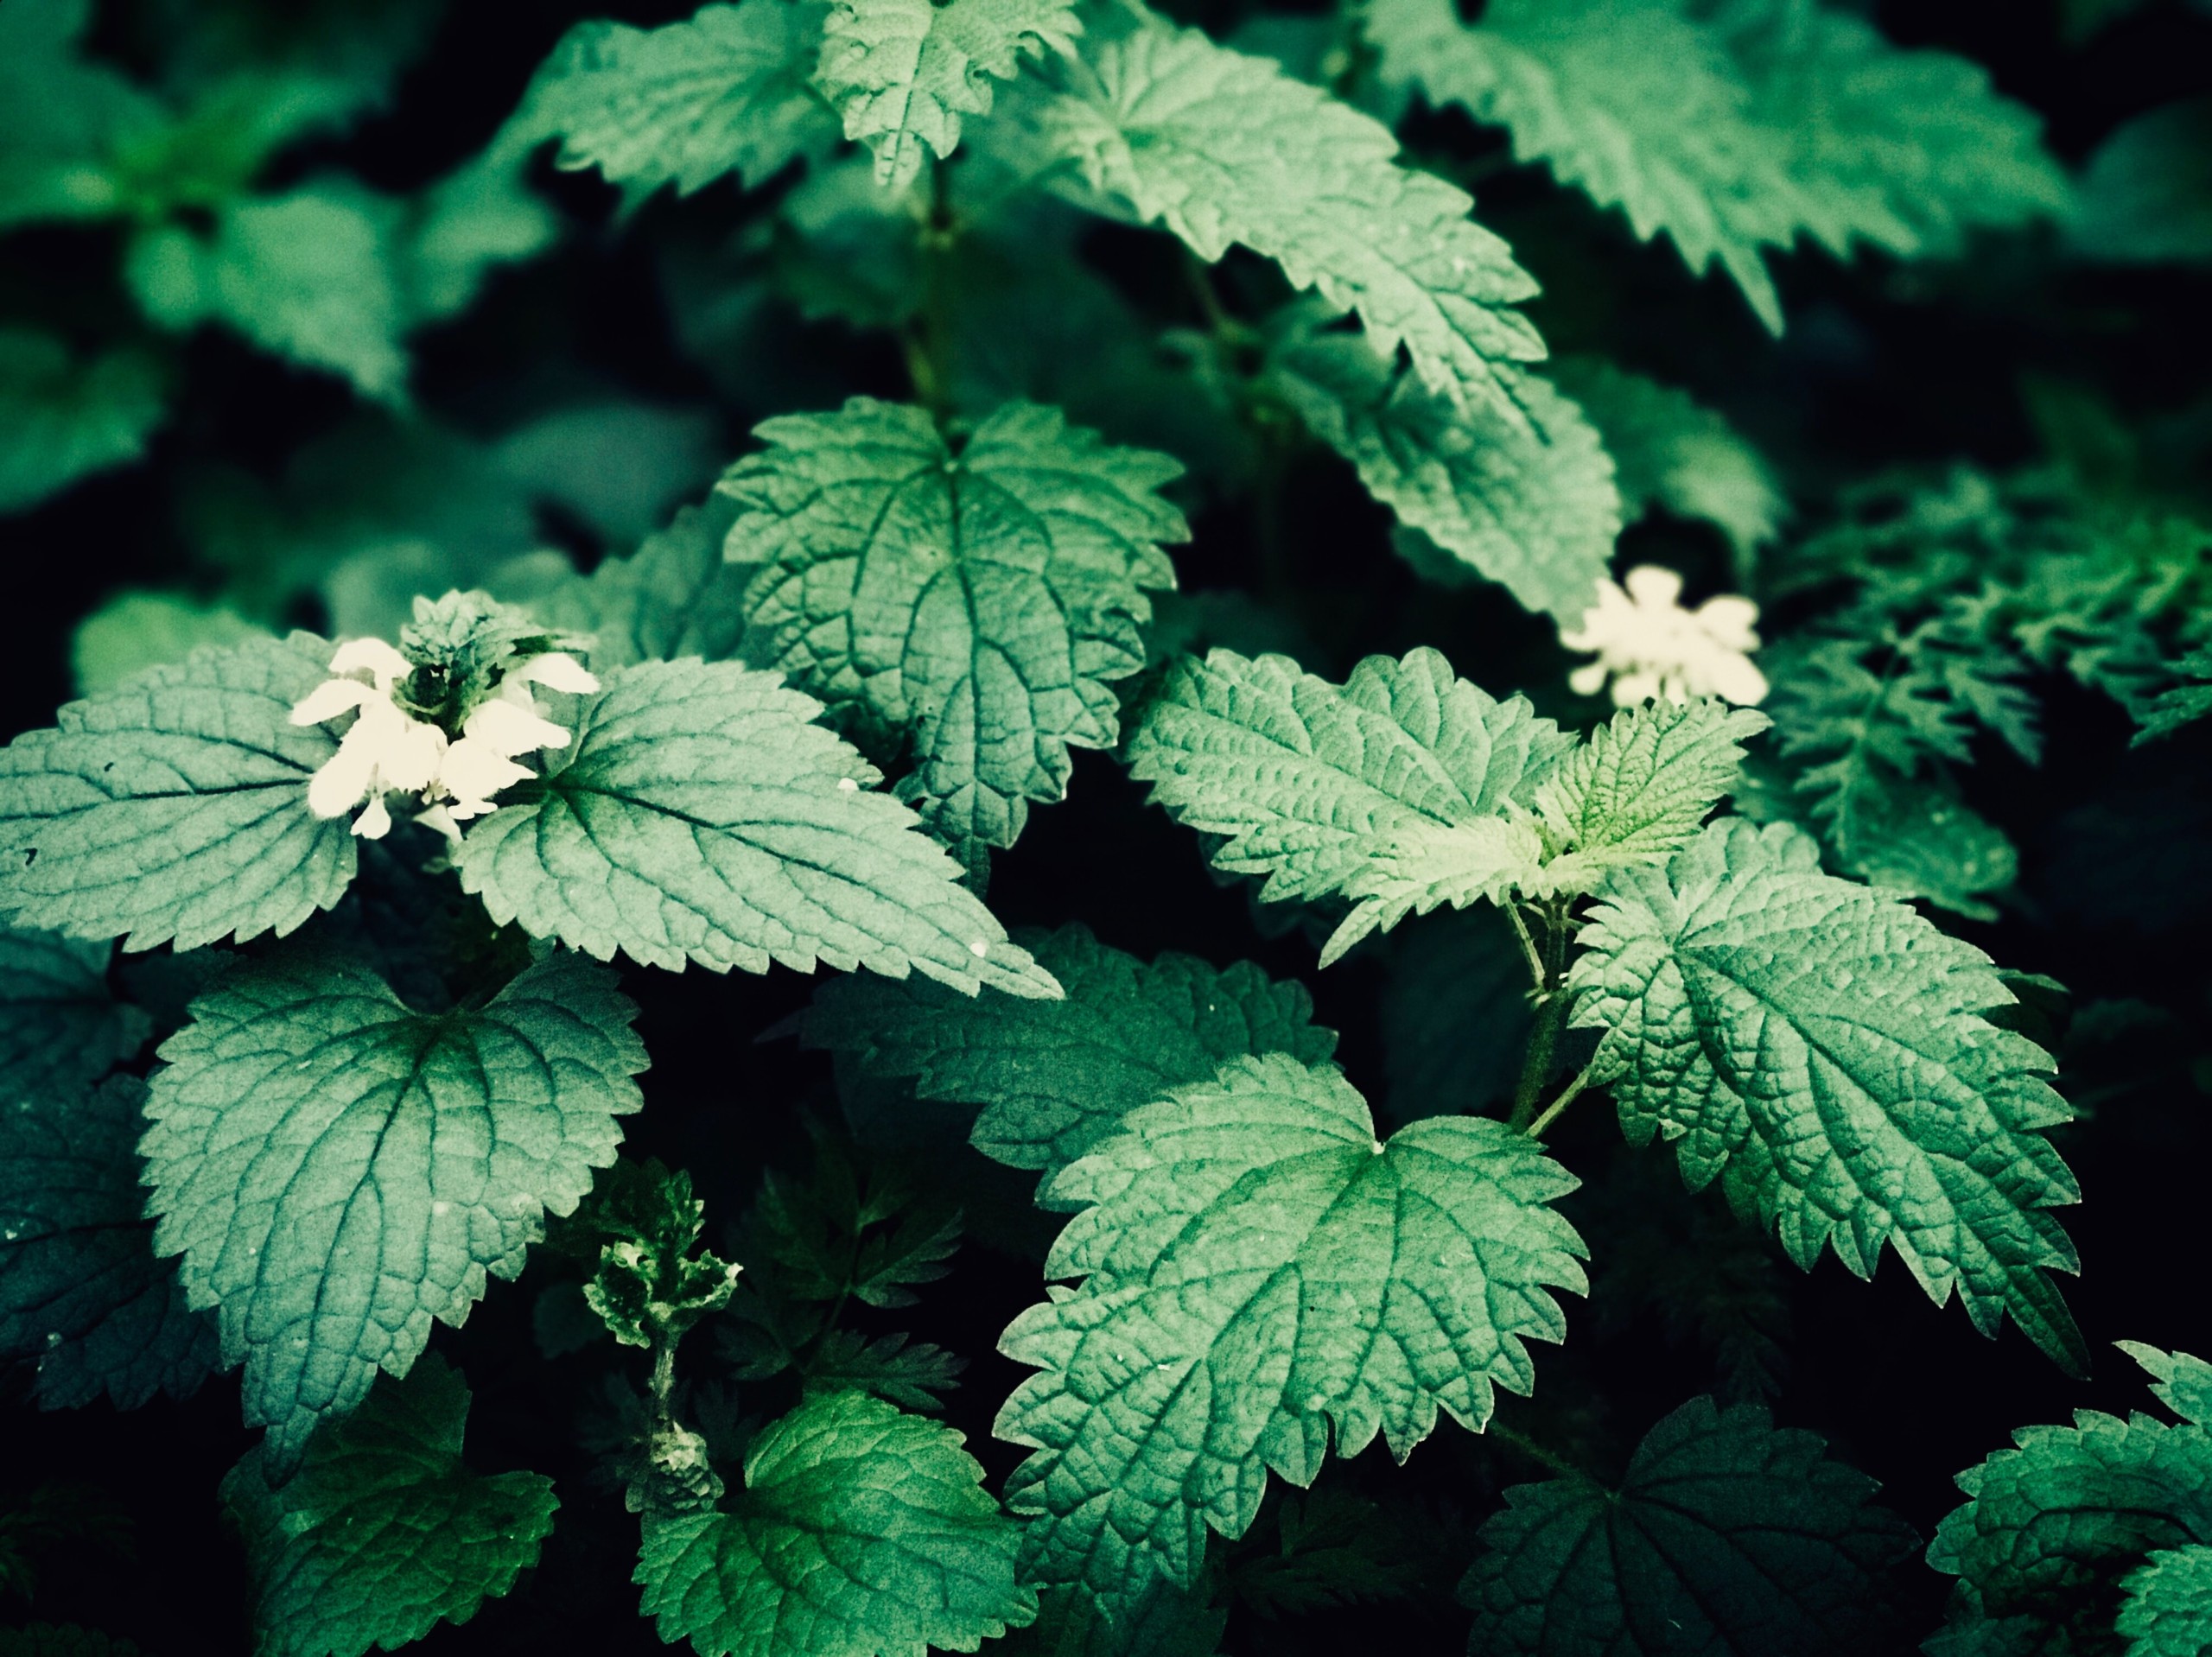 Herbal Focus: Stinging Nettle  <span class="latin">(Urtica dioica)</span>